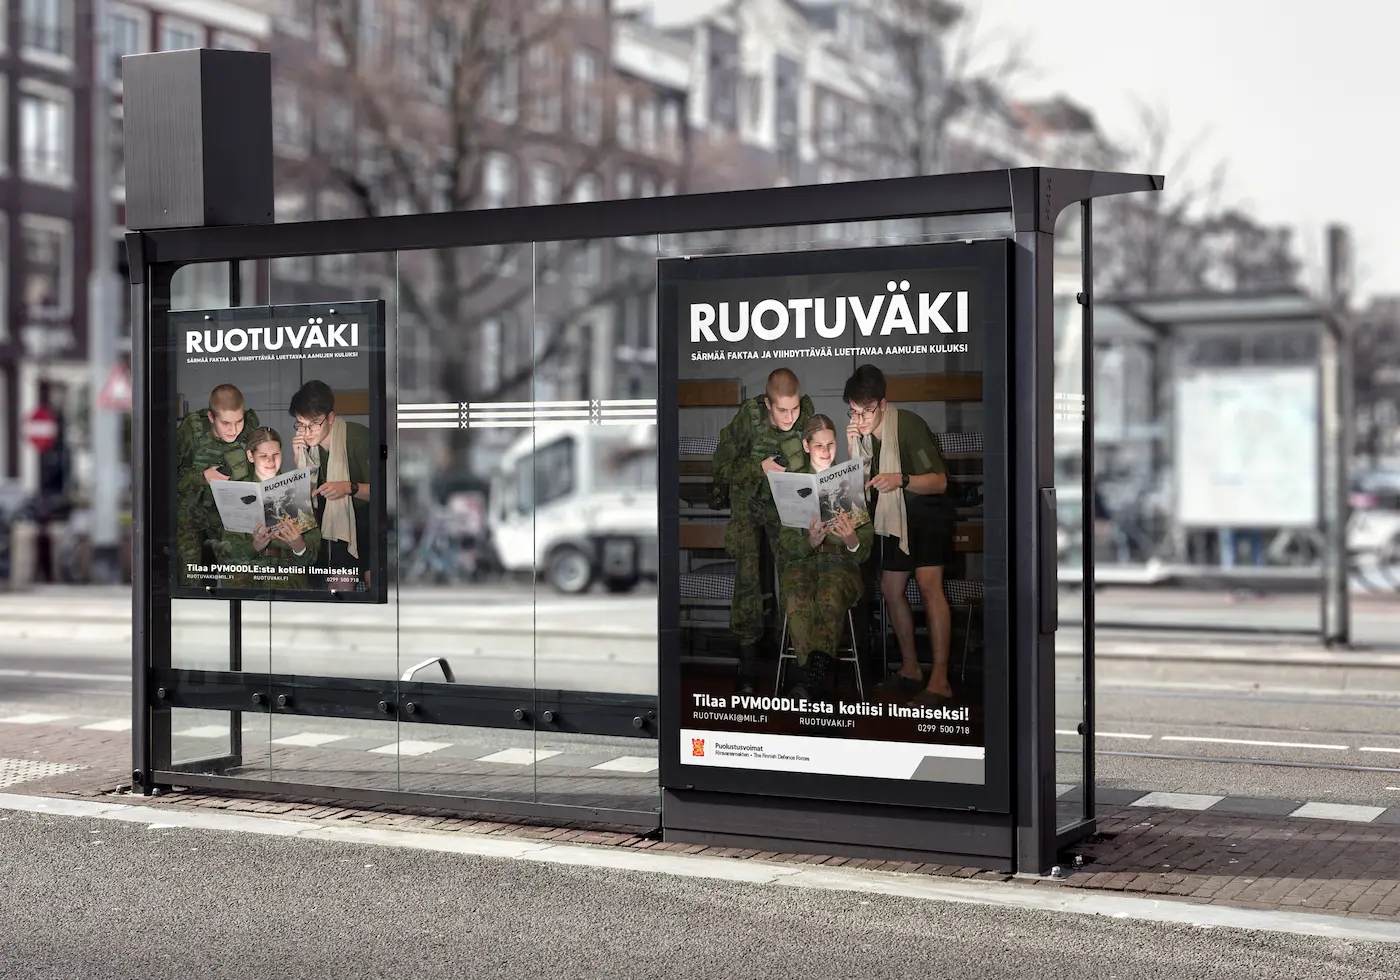 Promotional poster for the Ruotuväki monthly newspaper.